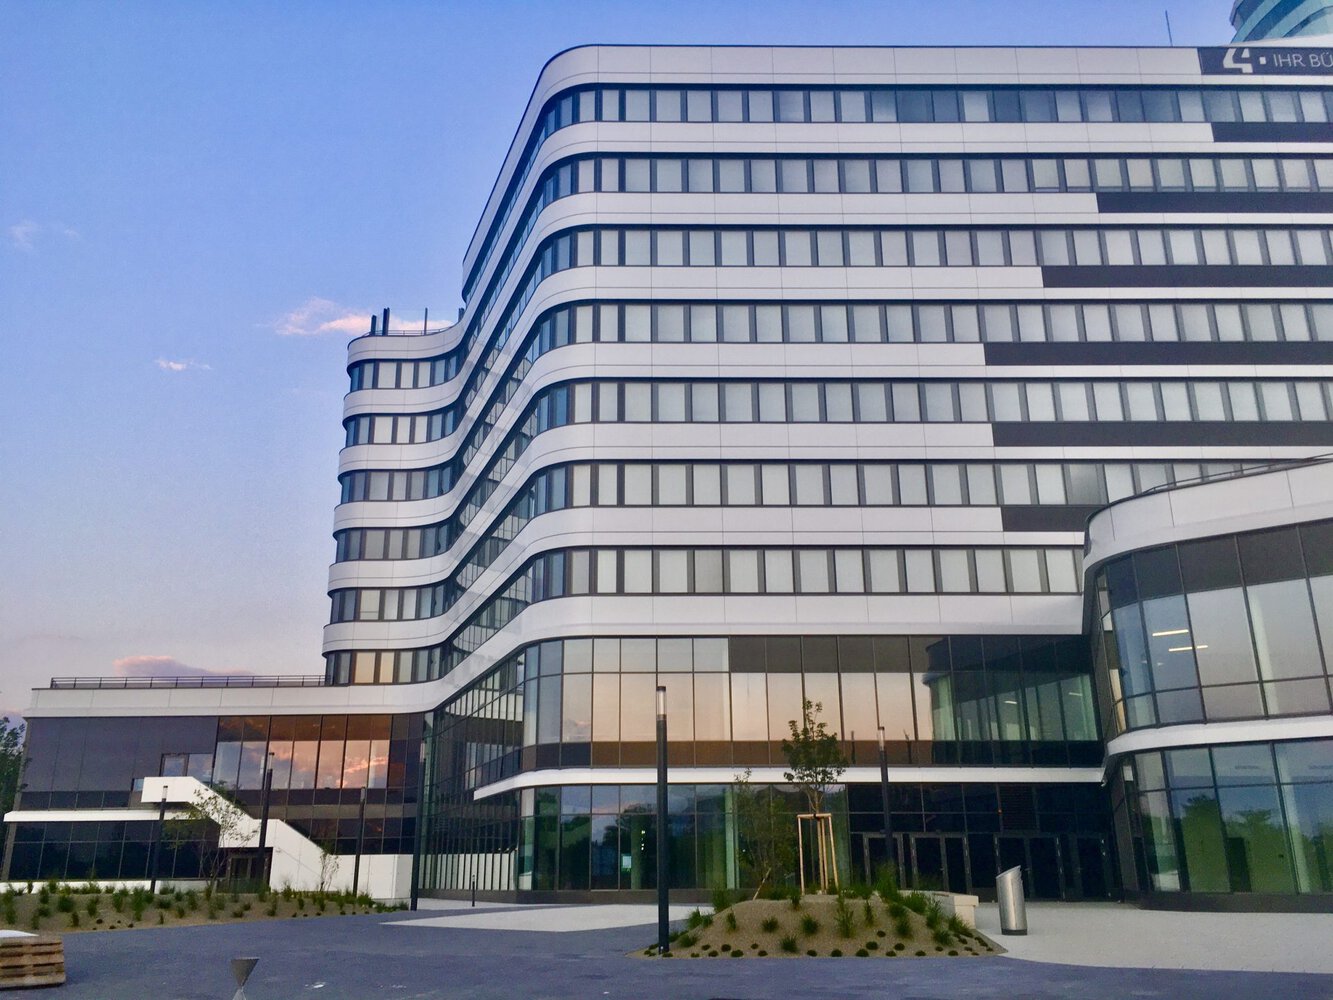 Exterior view of the Office Park 4 project